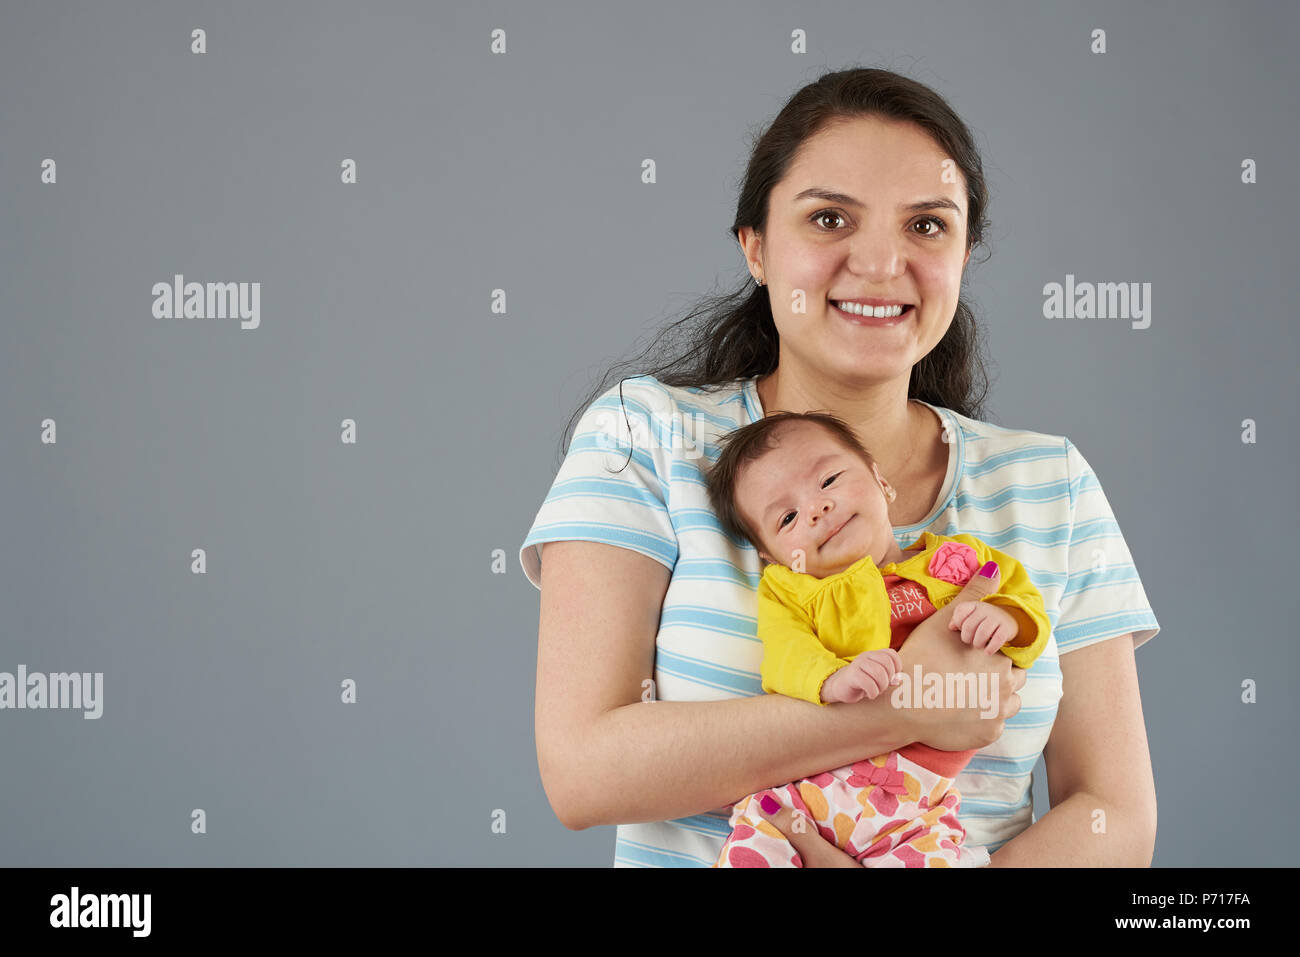 Young hispanic mother with small cute baby girl isolated on grey background portrait Stock Photo